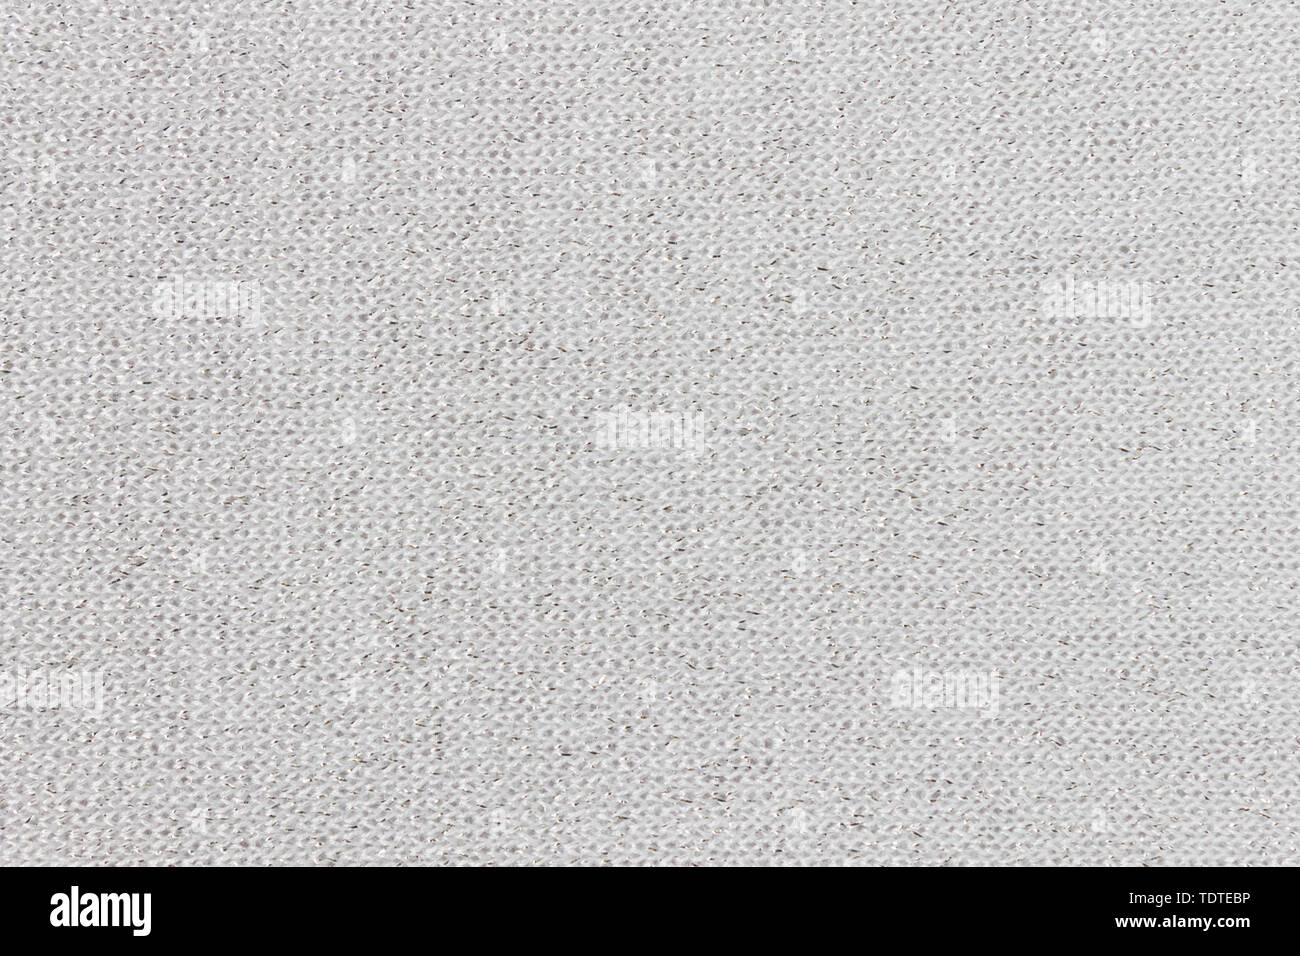 White Glitter Fabric Texture Background. Glitter Fabric Texture for ...